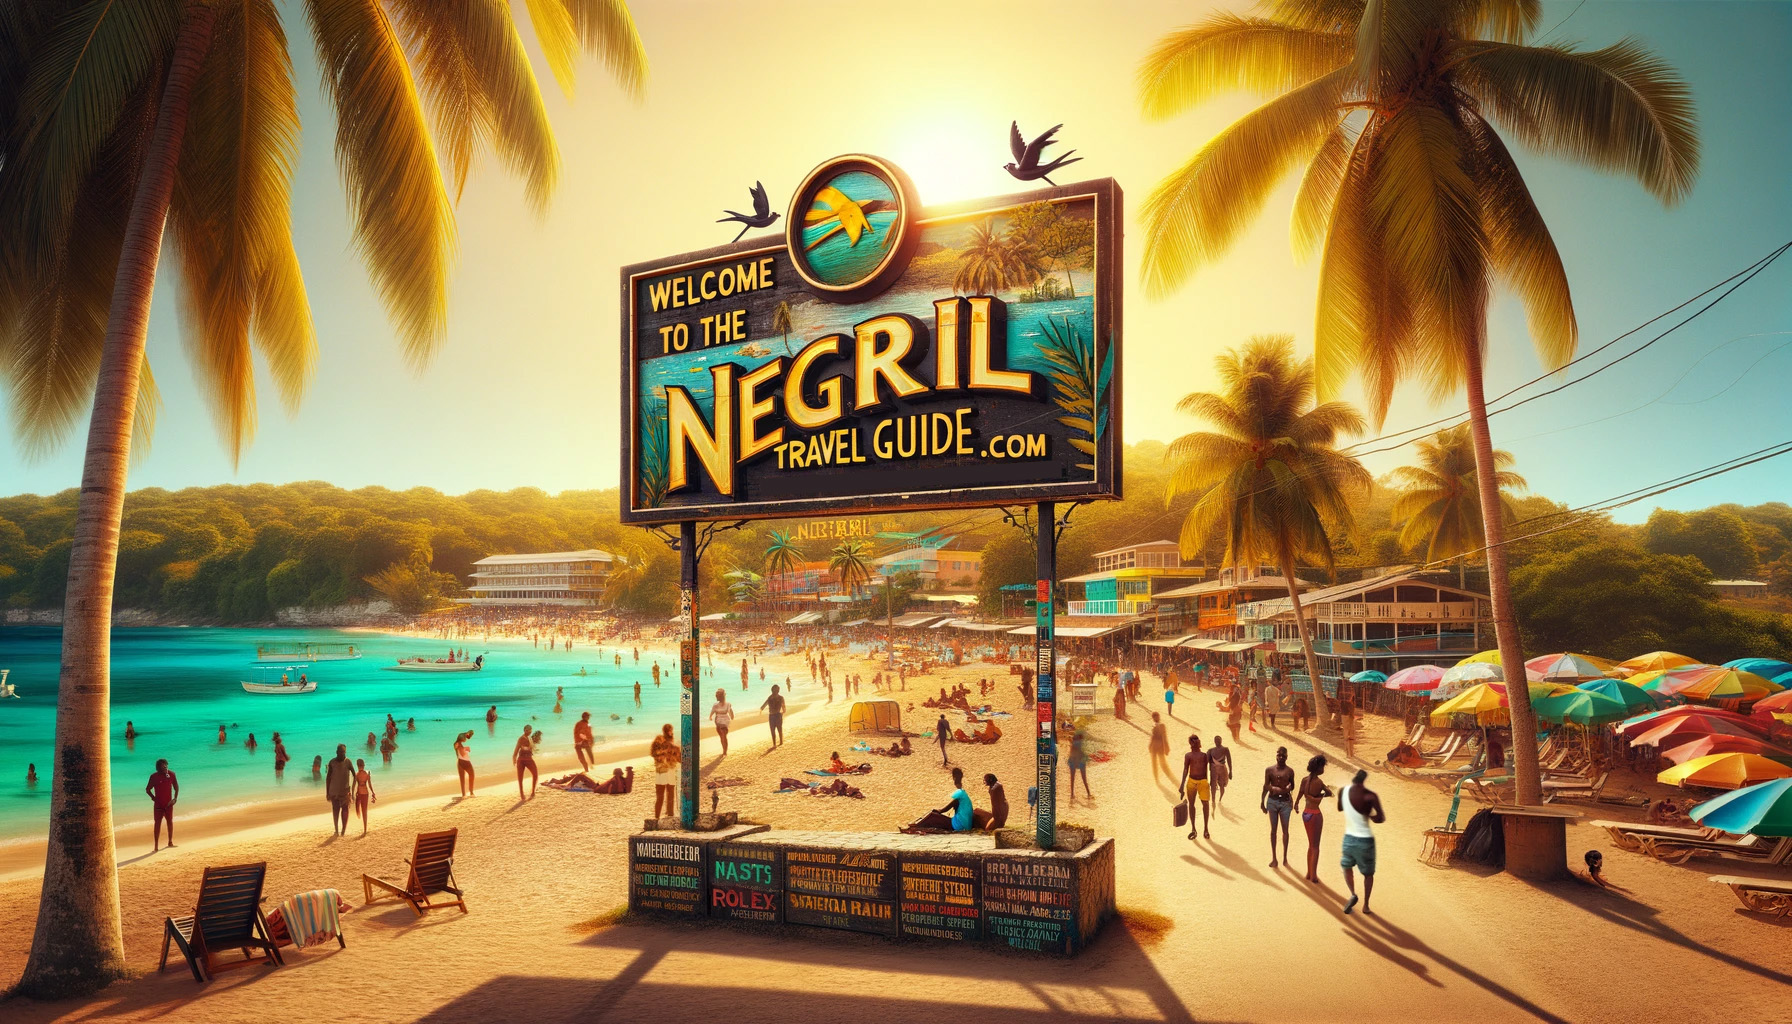 Welcome to Negril Travel Guide